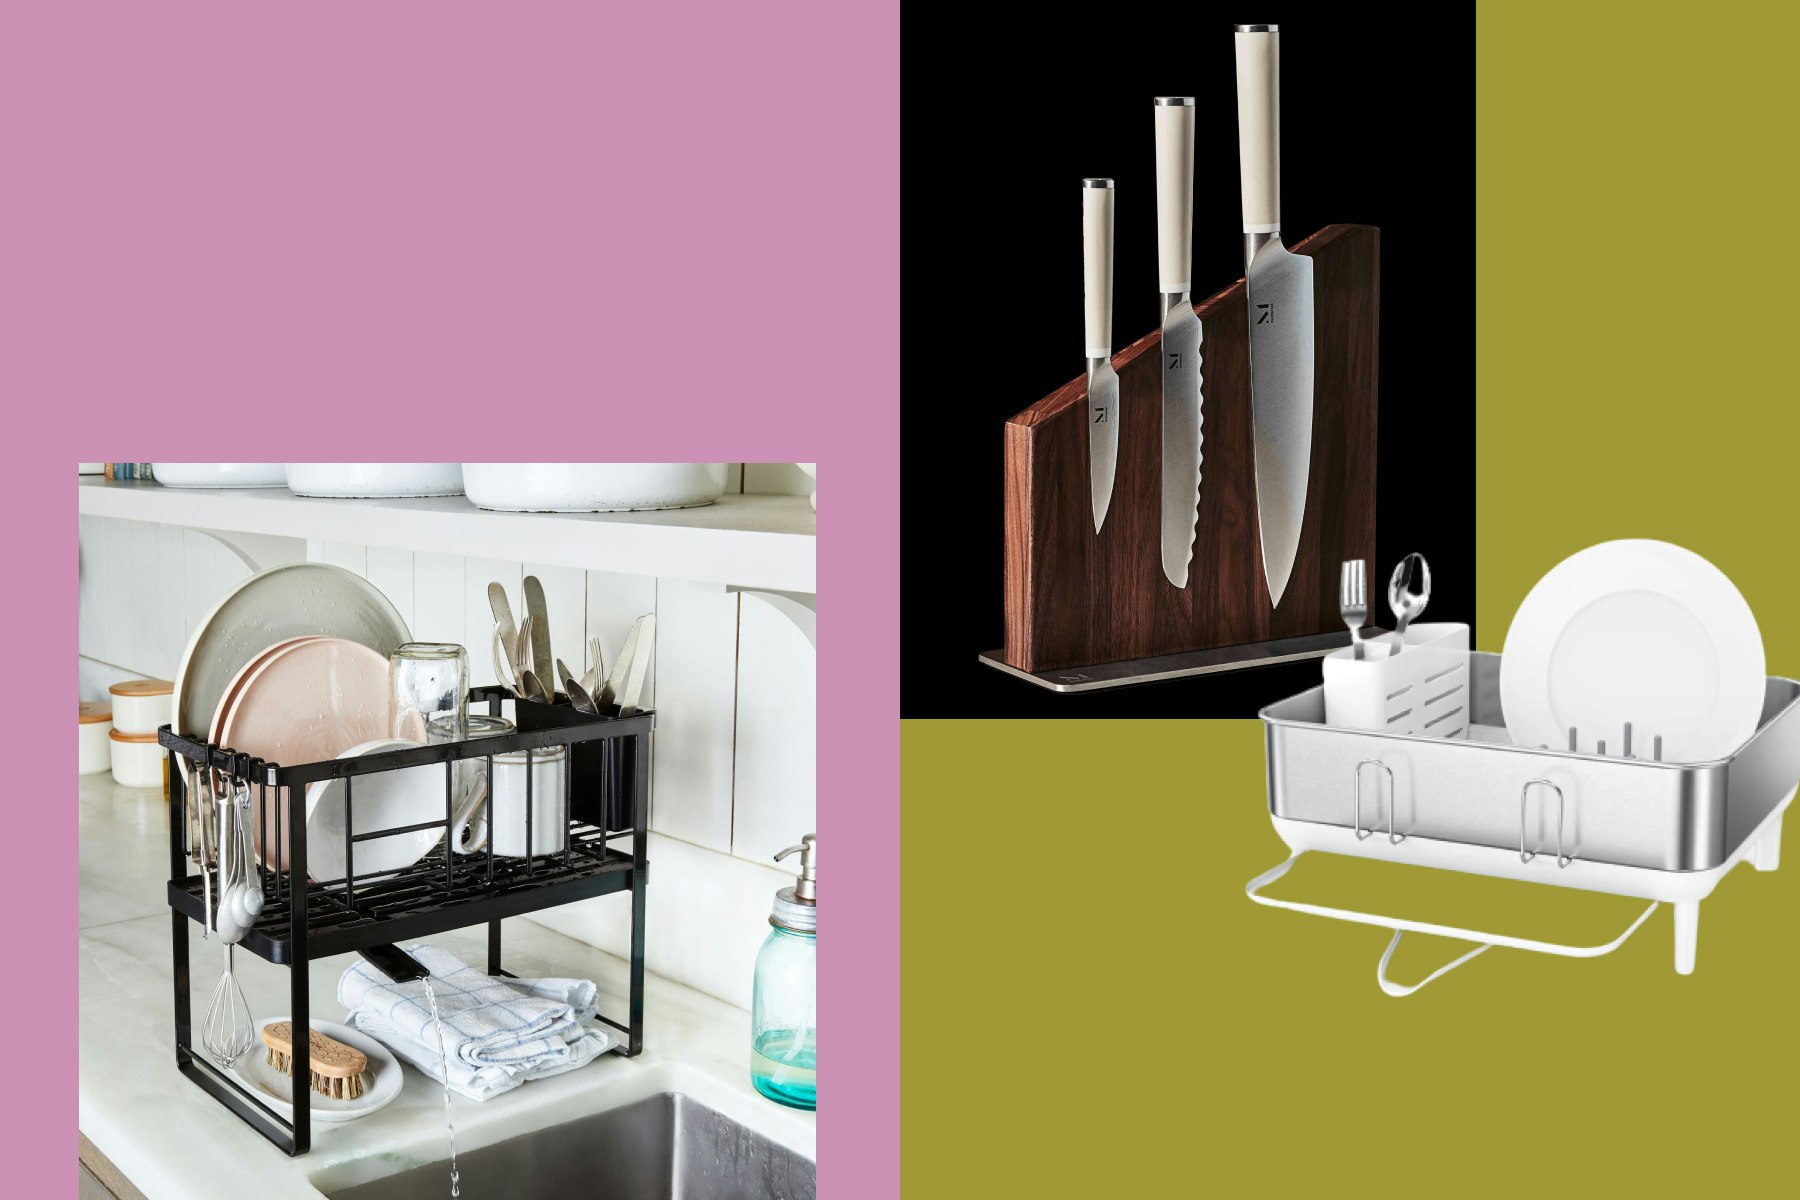 10 Best-Selling Dish Racks To Help You Save Time And Clear Space